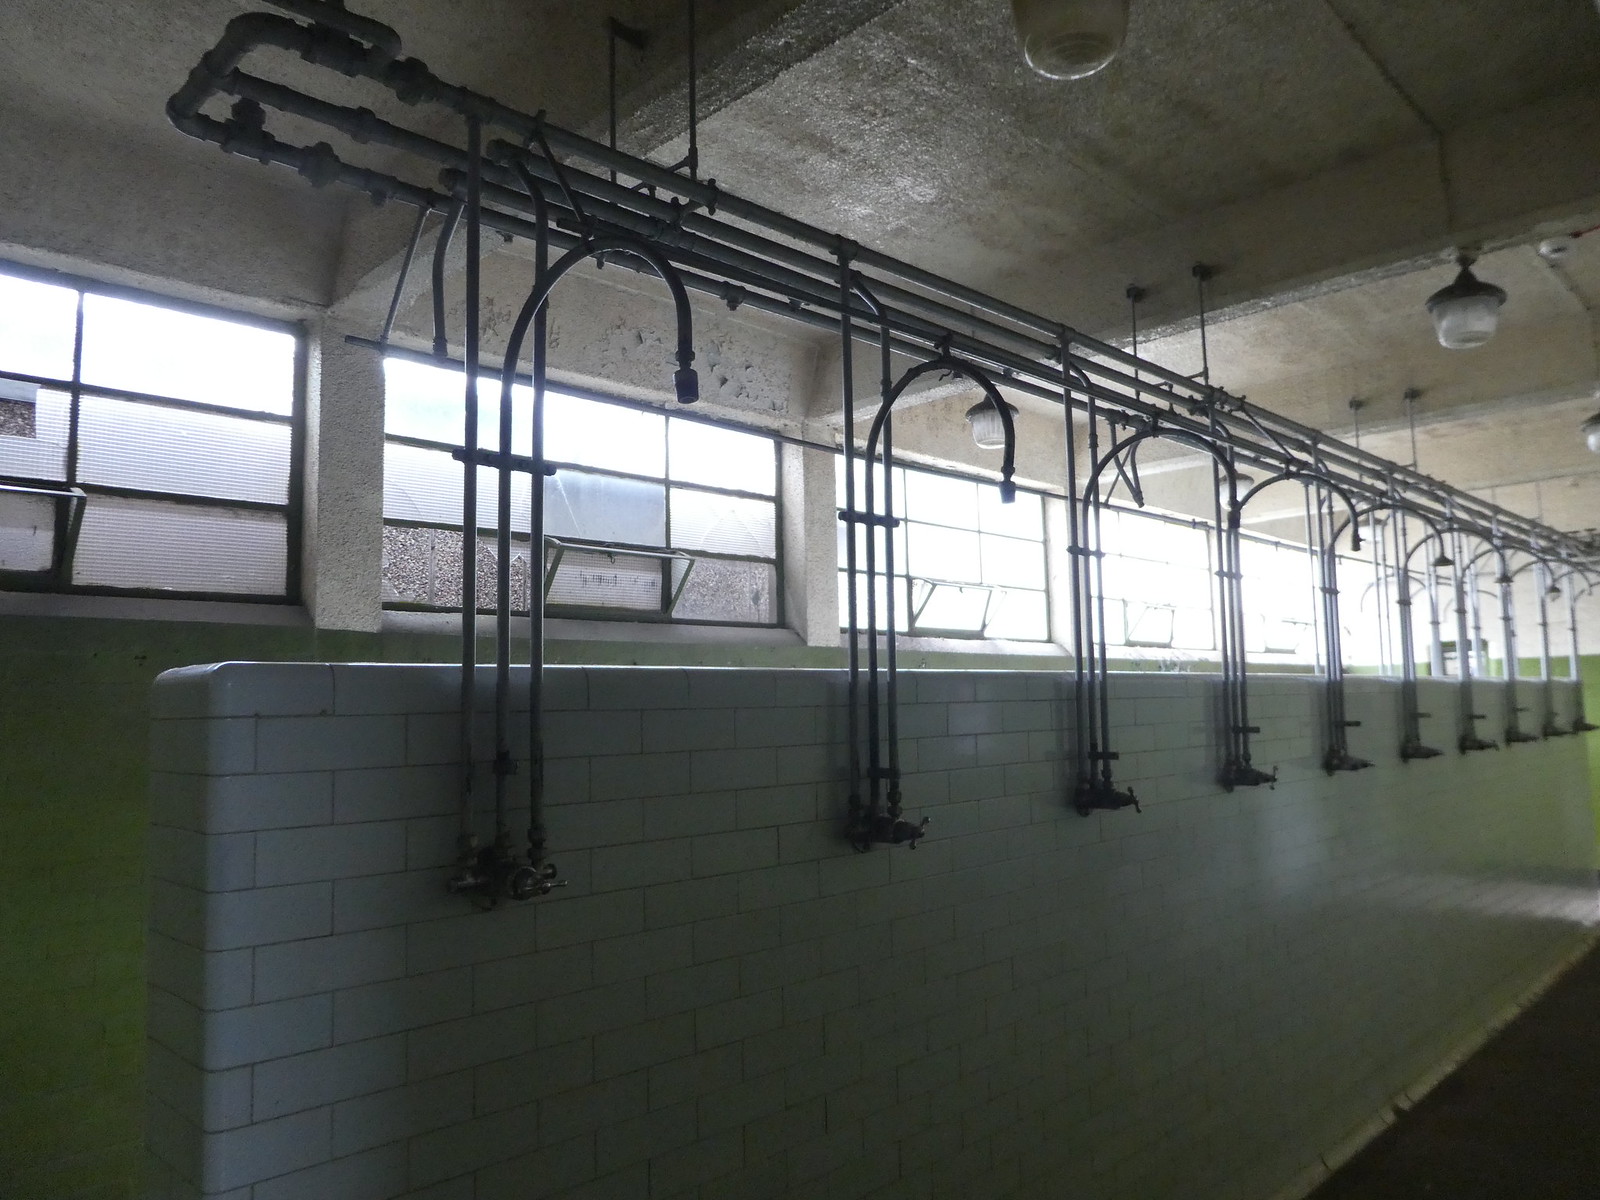 Showers in the Pit Head Baths at the National Coal Mining Museum